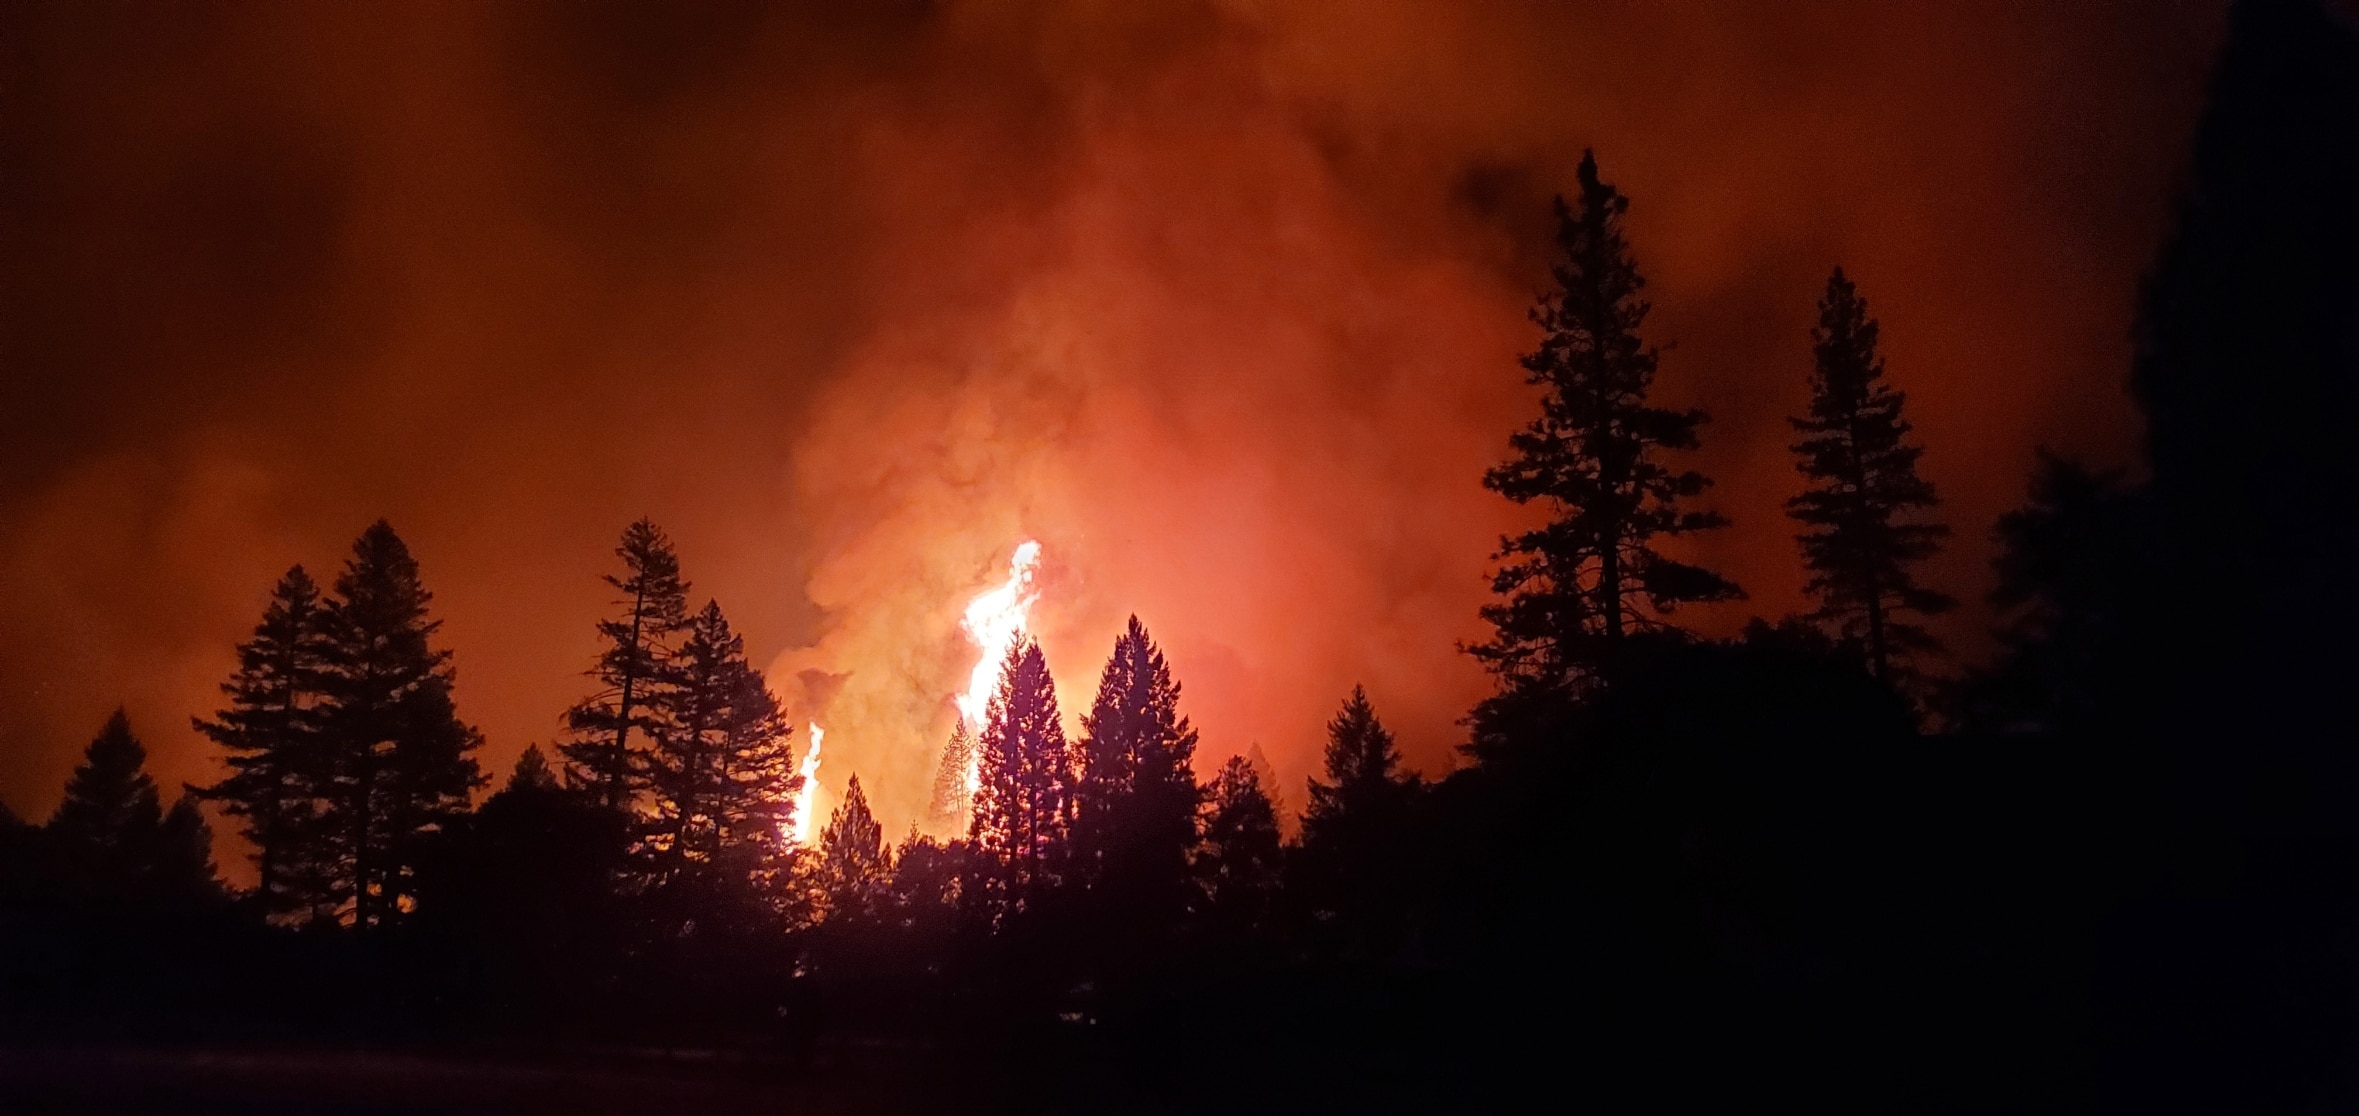 Historic California fire burning a forest